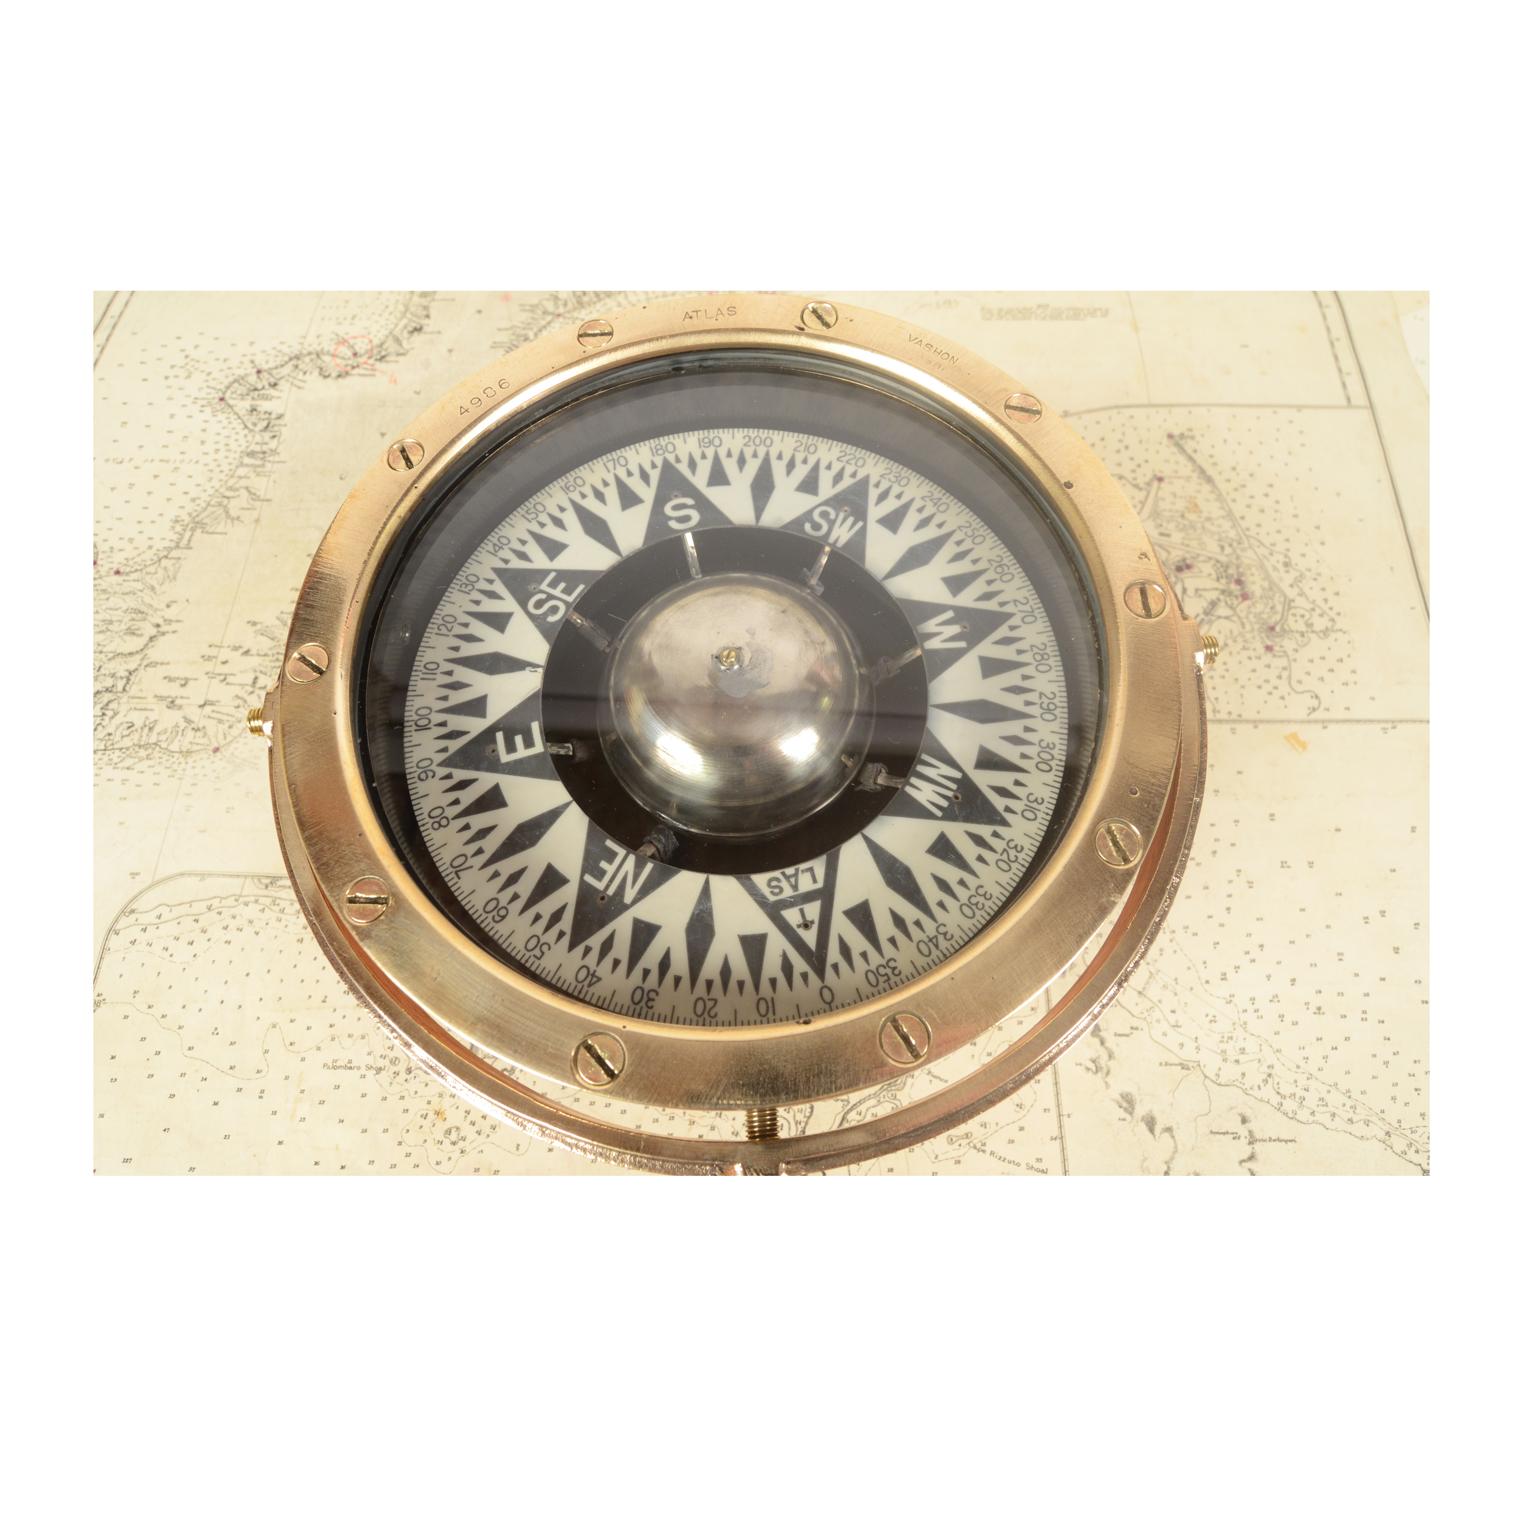 Large brass and glass compass on universal joint signed Atlas Vashon (Washington)n. 4986. Mounted on mahogany board made and to measure. The compass consists of a cylindrical brass container, called a mortar, with double glass on the bottom of which